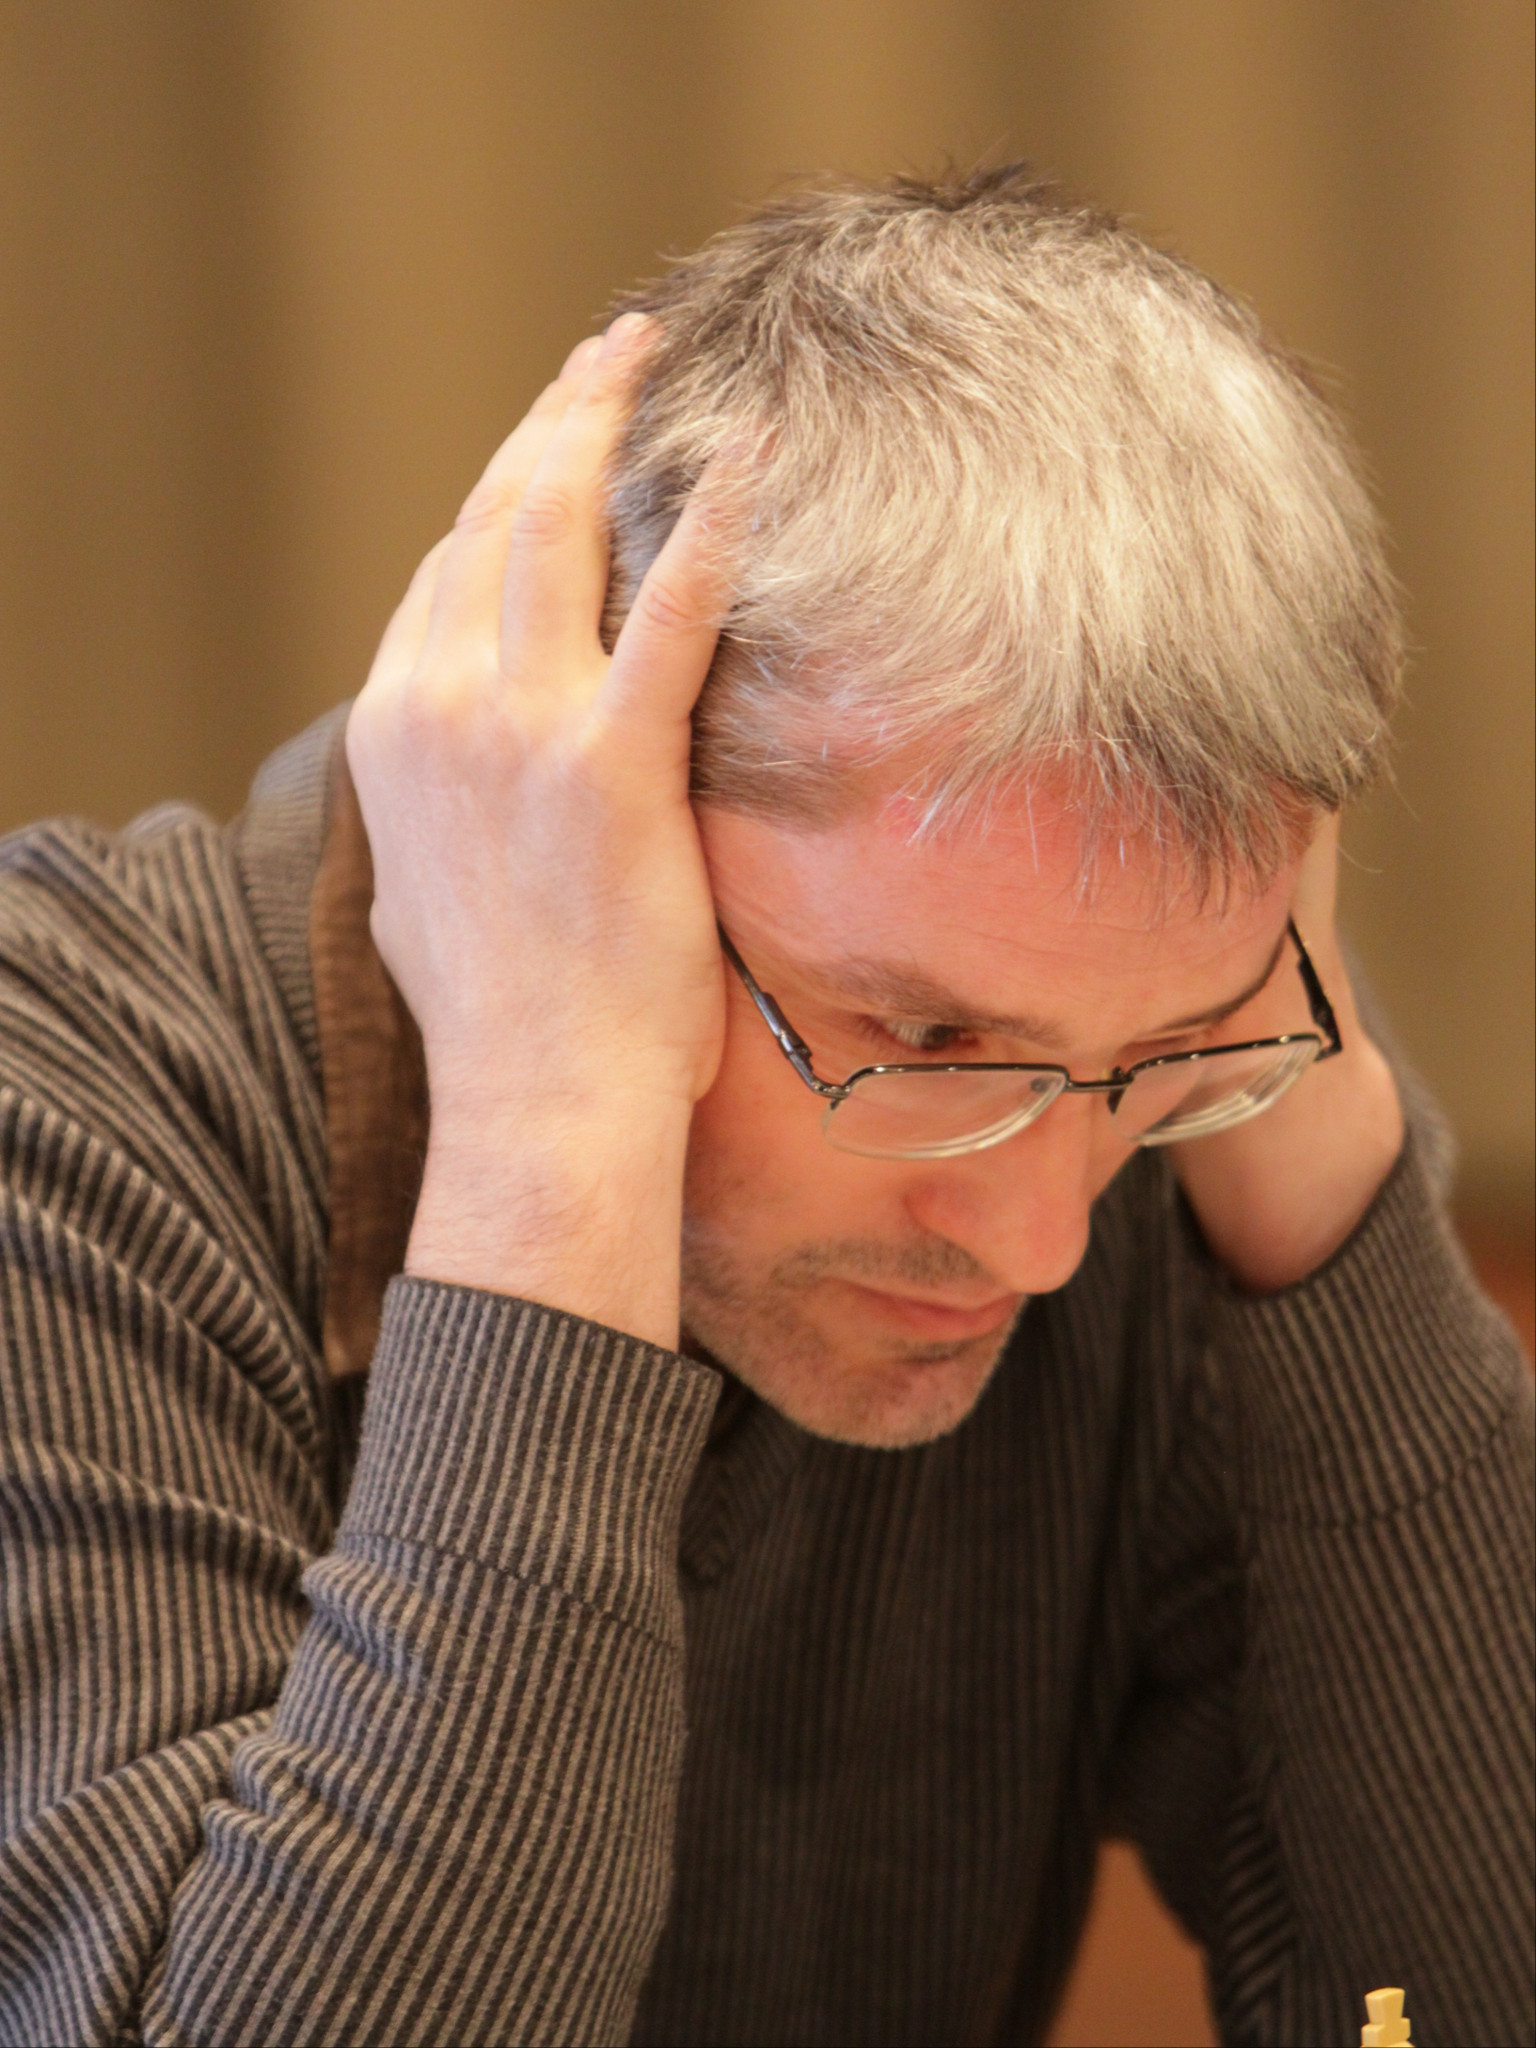 Igors Rausis has been stripped of his Grandmaster status and banned for six years by the international Chess Federation after admitting cheating ©Wikipedia